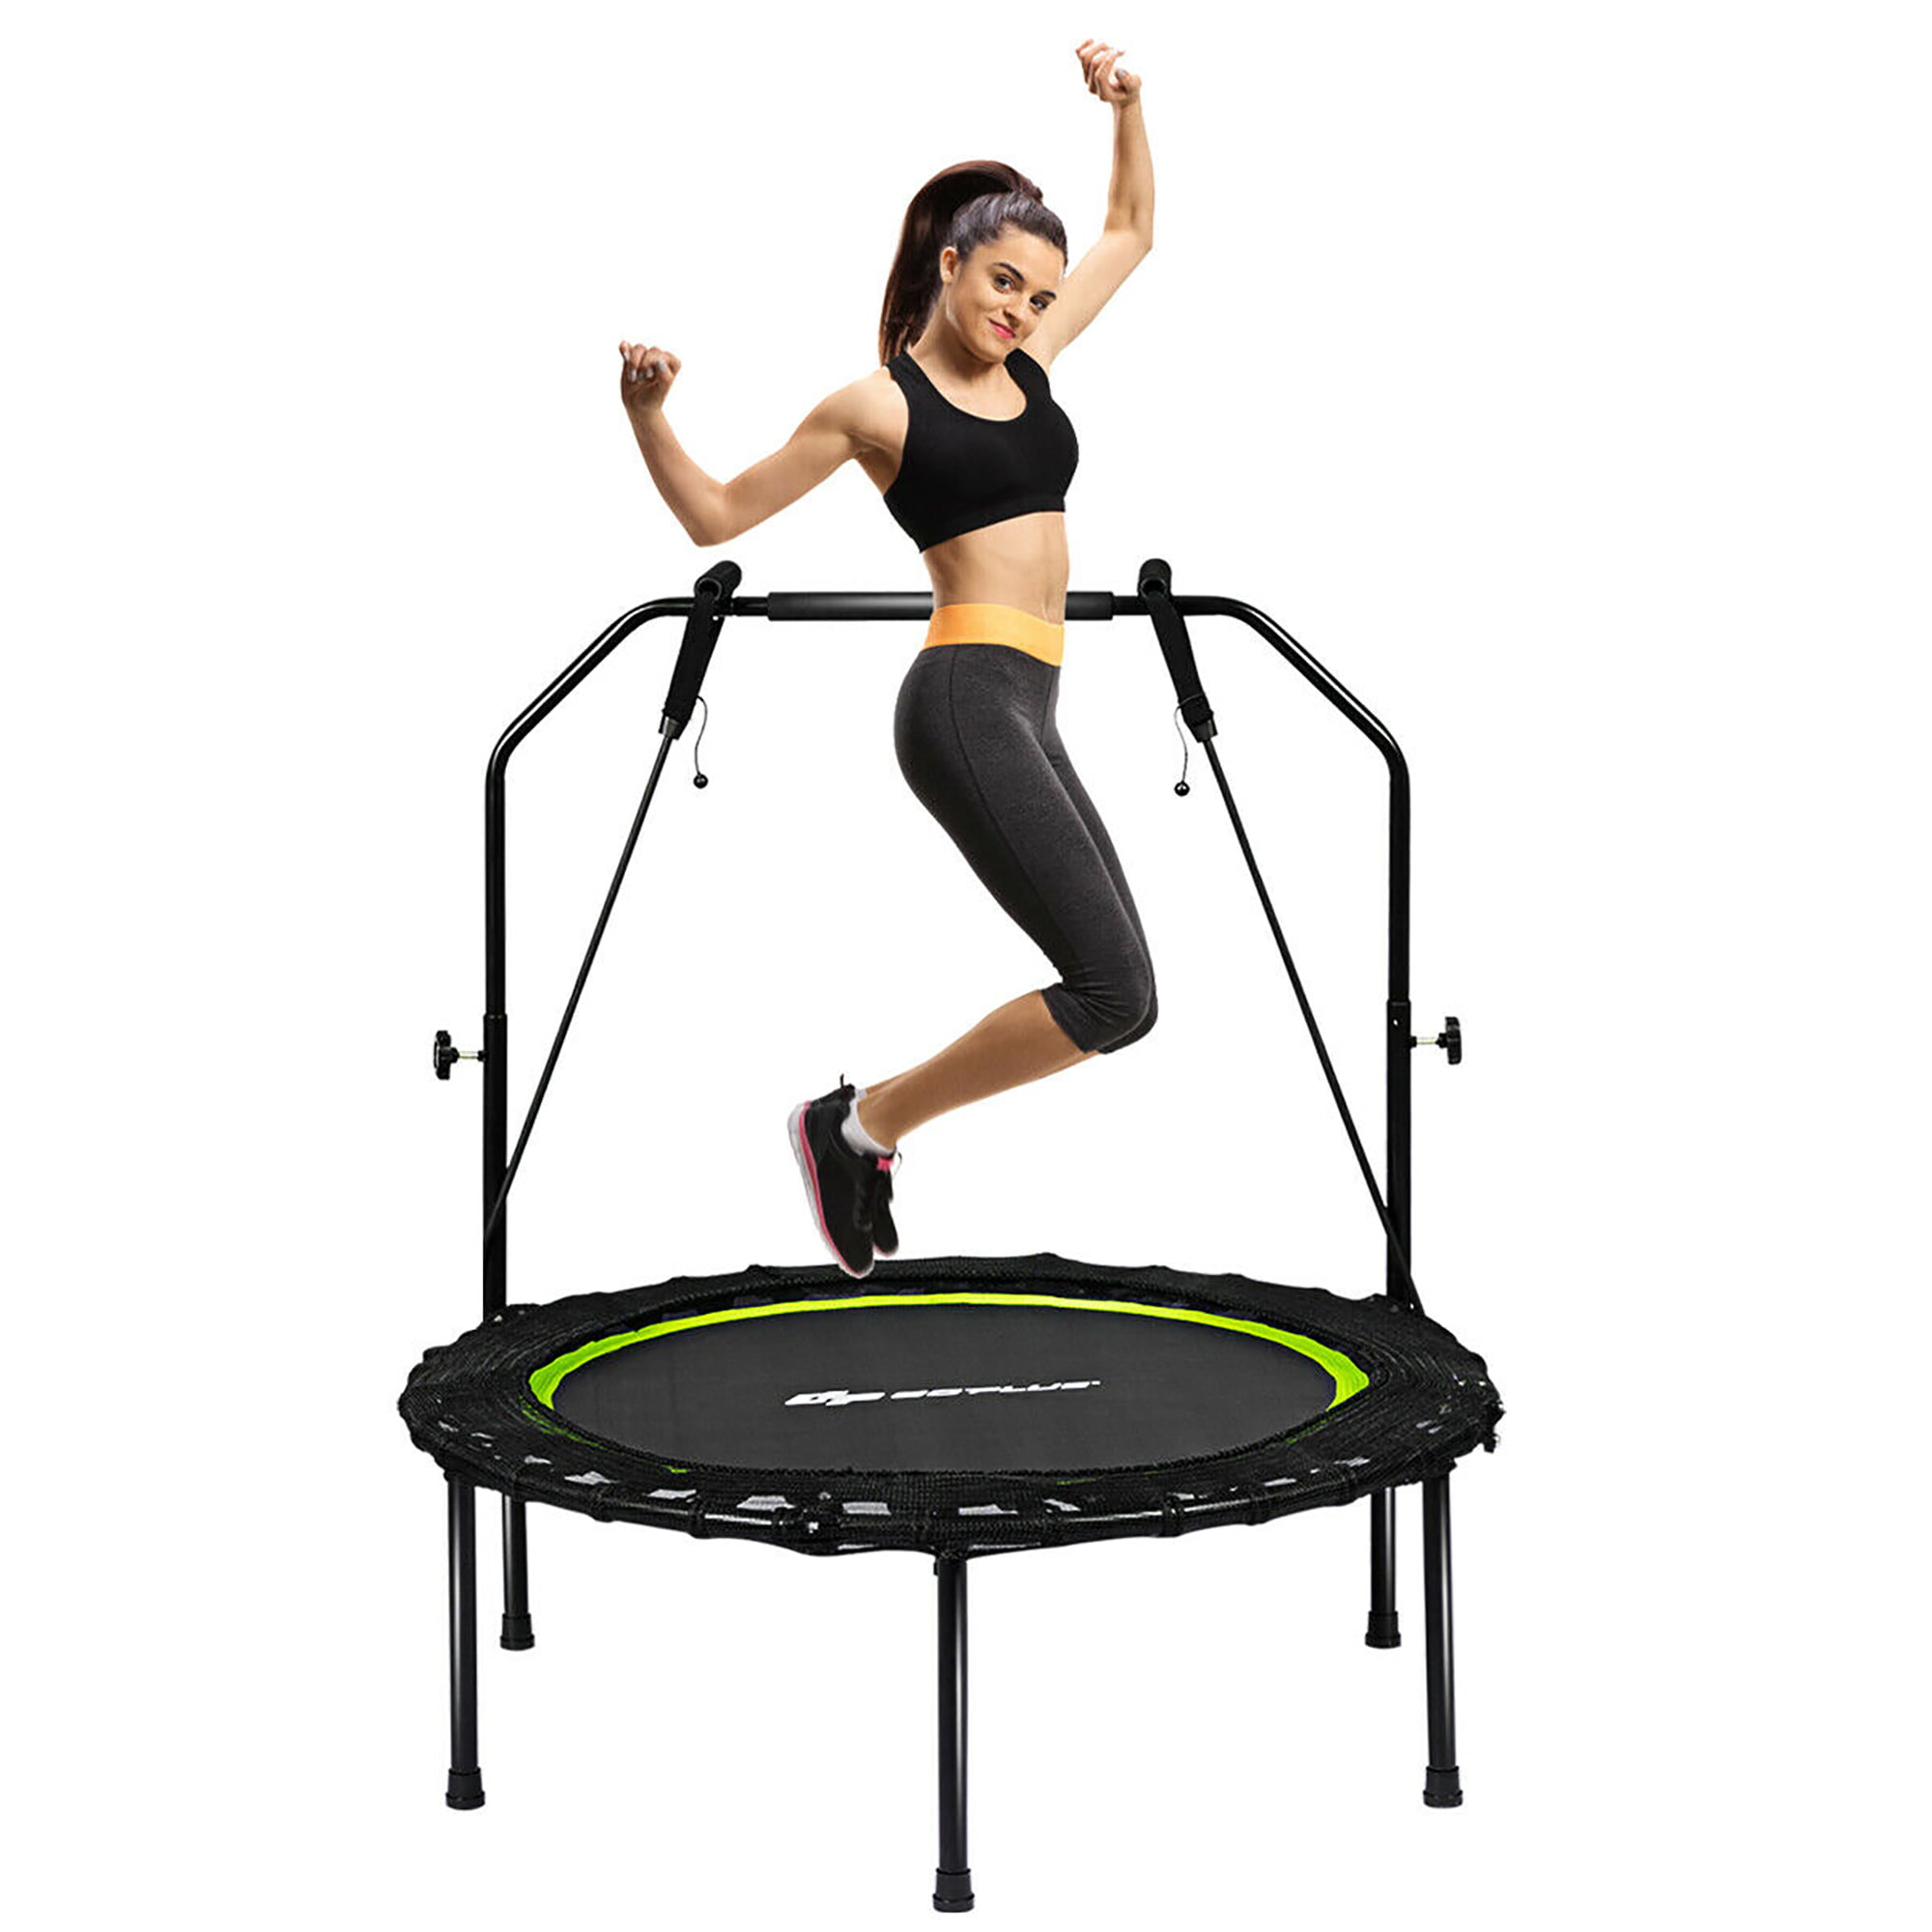 Foldable Fitness Bouncer with Adjustable T-Handle Bar and Safety Pad Indoor Aerobic Workout Rebounder for Kids Adults COSTWAY 47 Mini Trampoline 